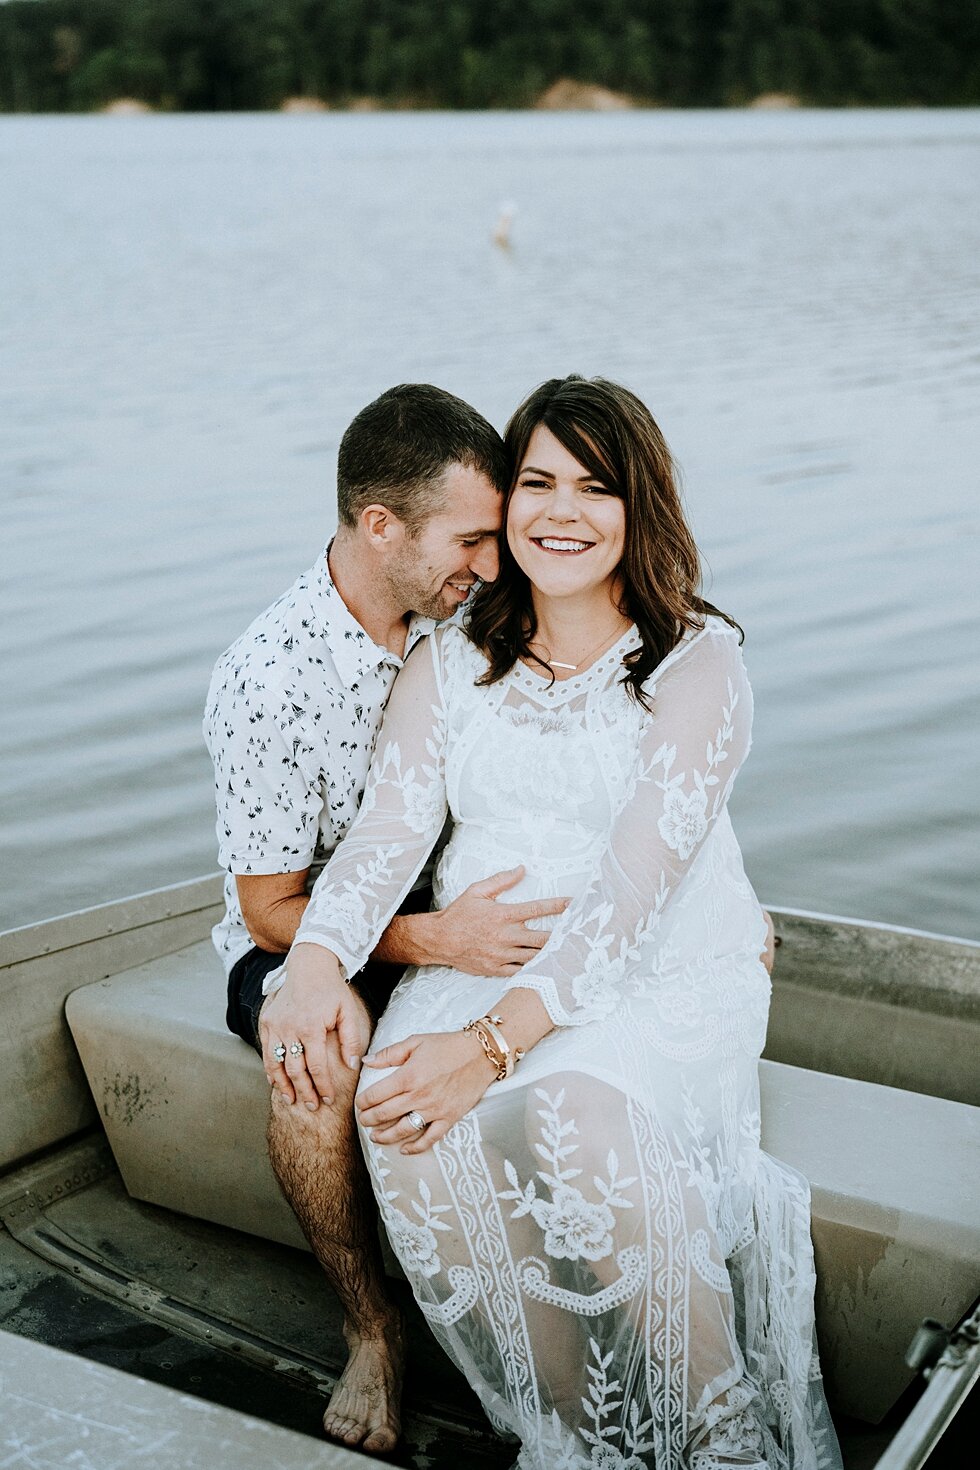  Sitting in a boat at Deam Lake these two could not contain their excitement for their little one on the way #maternitygoals #maternityphotographer #babybump #outdoorphotosession #kentuckyphotographer #indianaphotographer #louisvillephotographer #mat